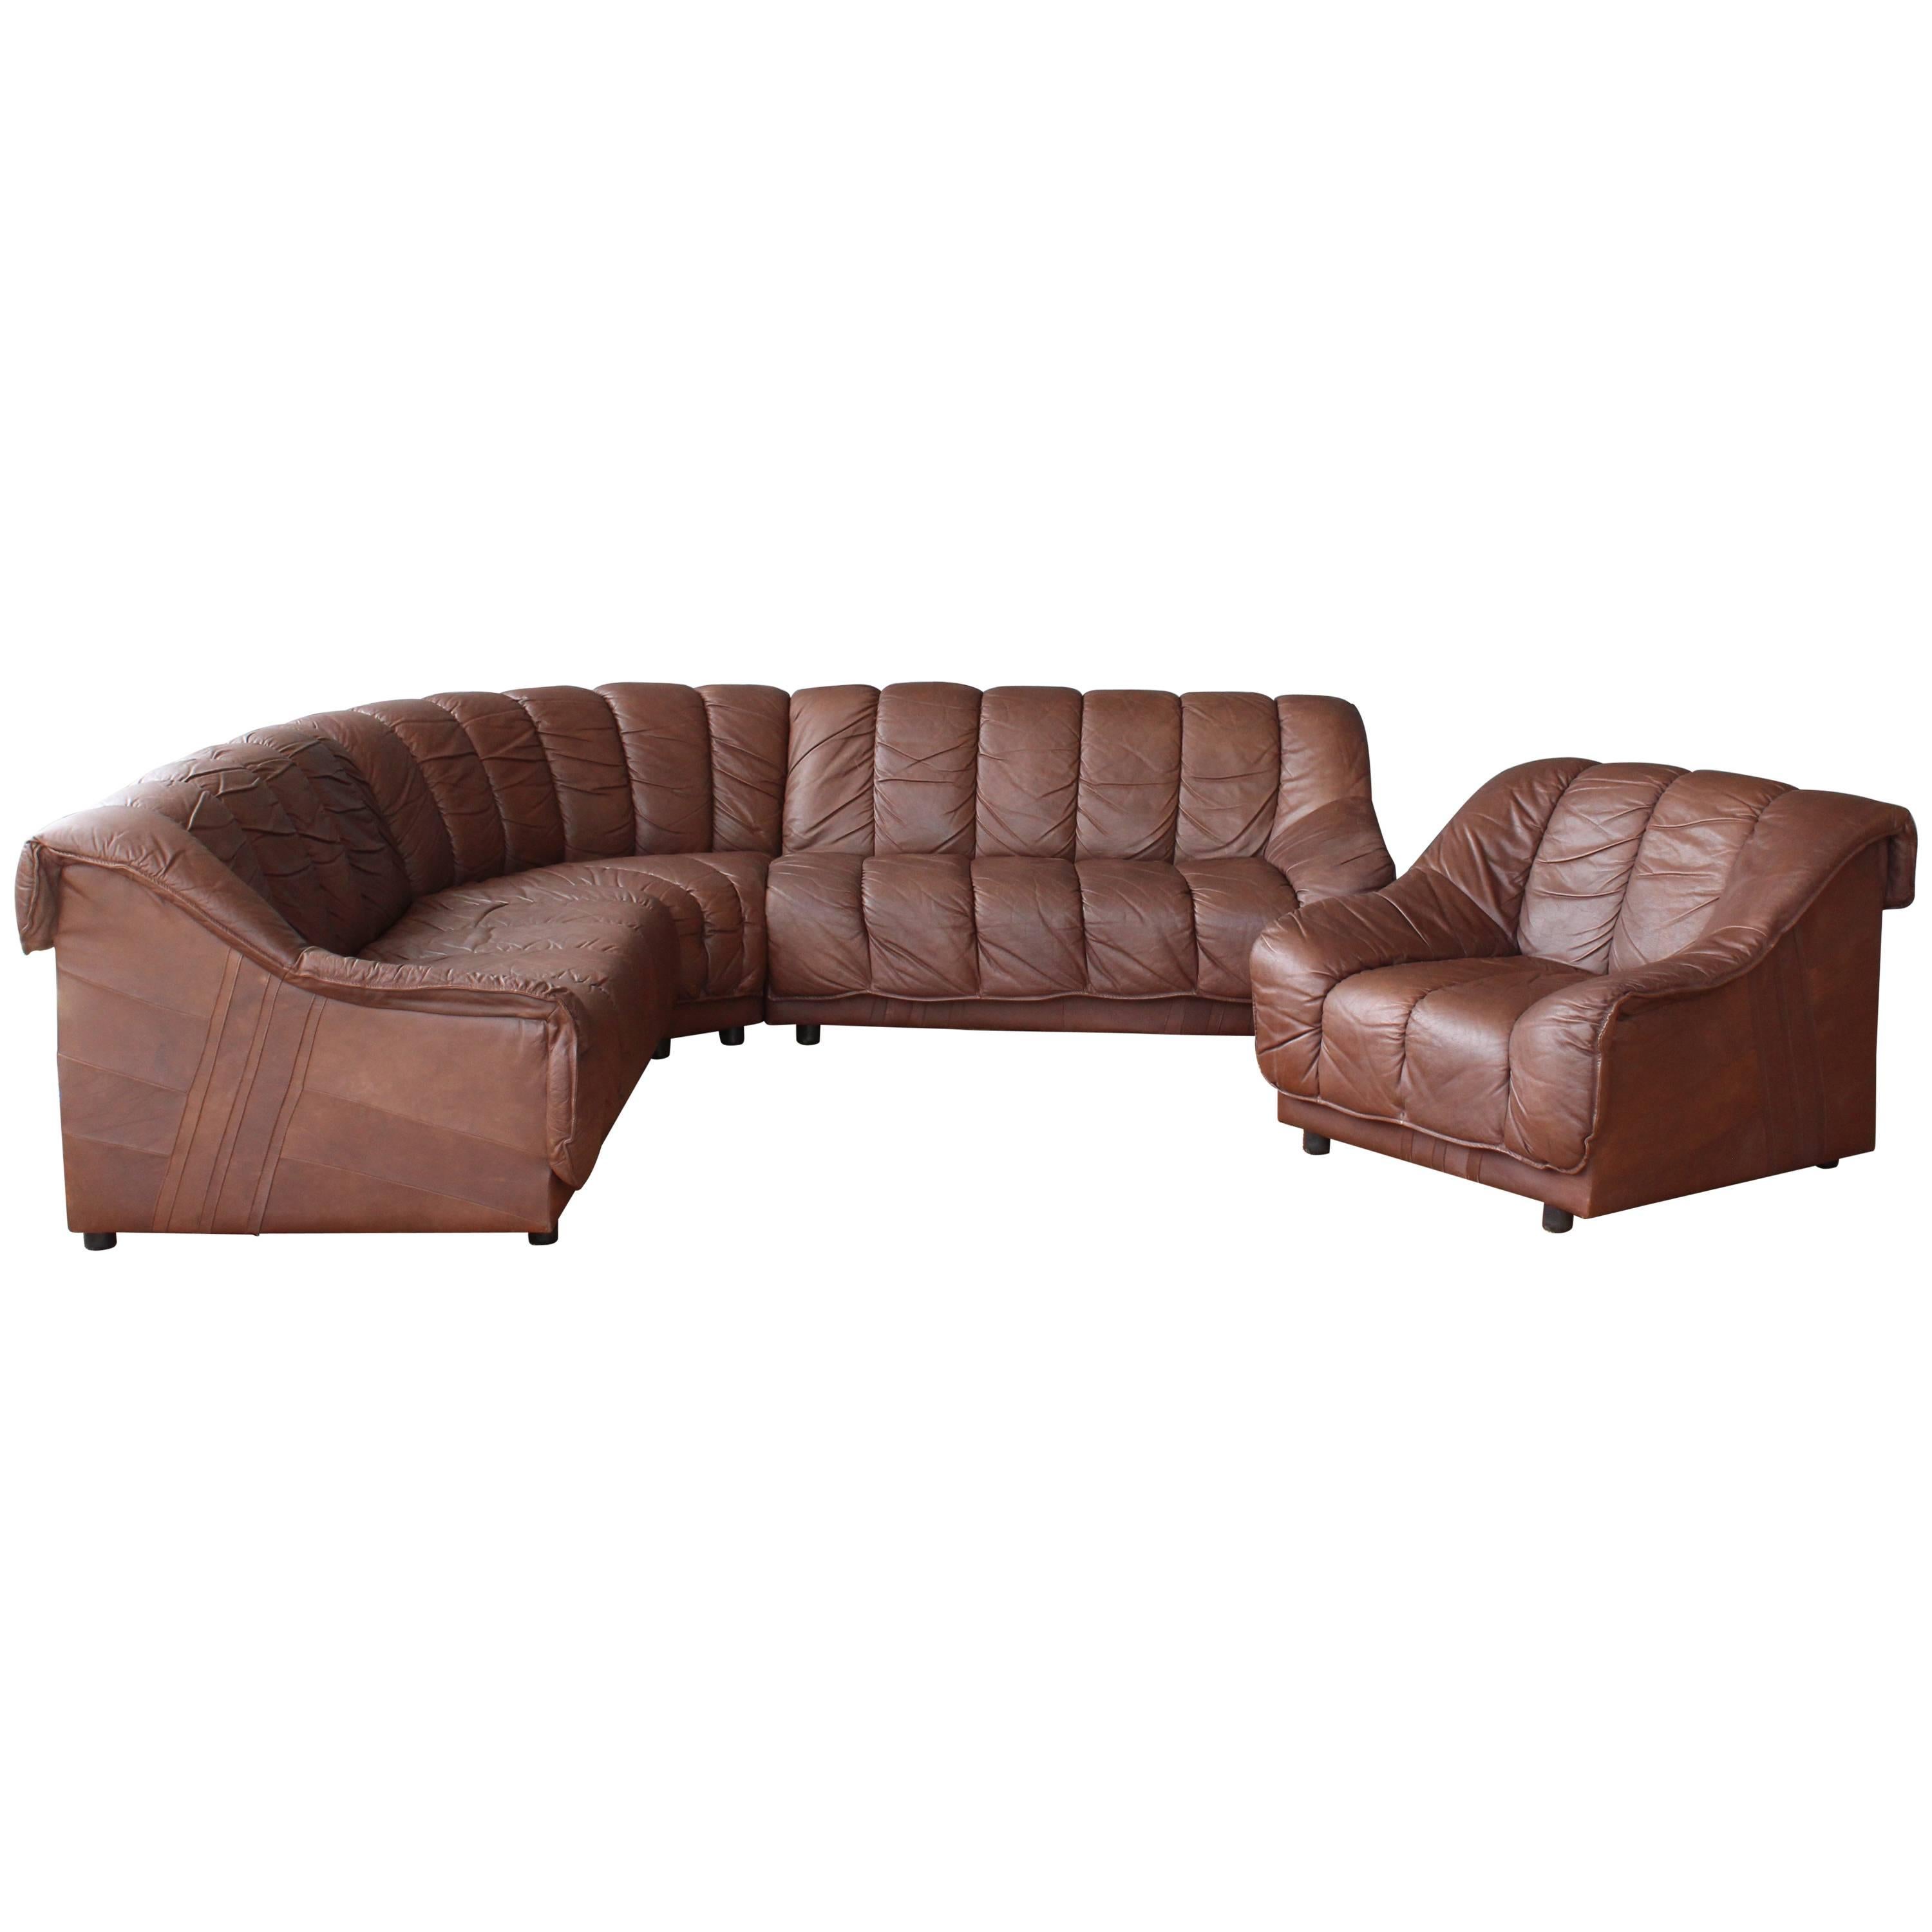 1970s Genuine Leather Sectional Sofa